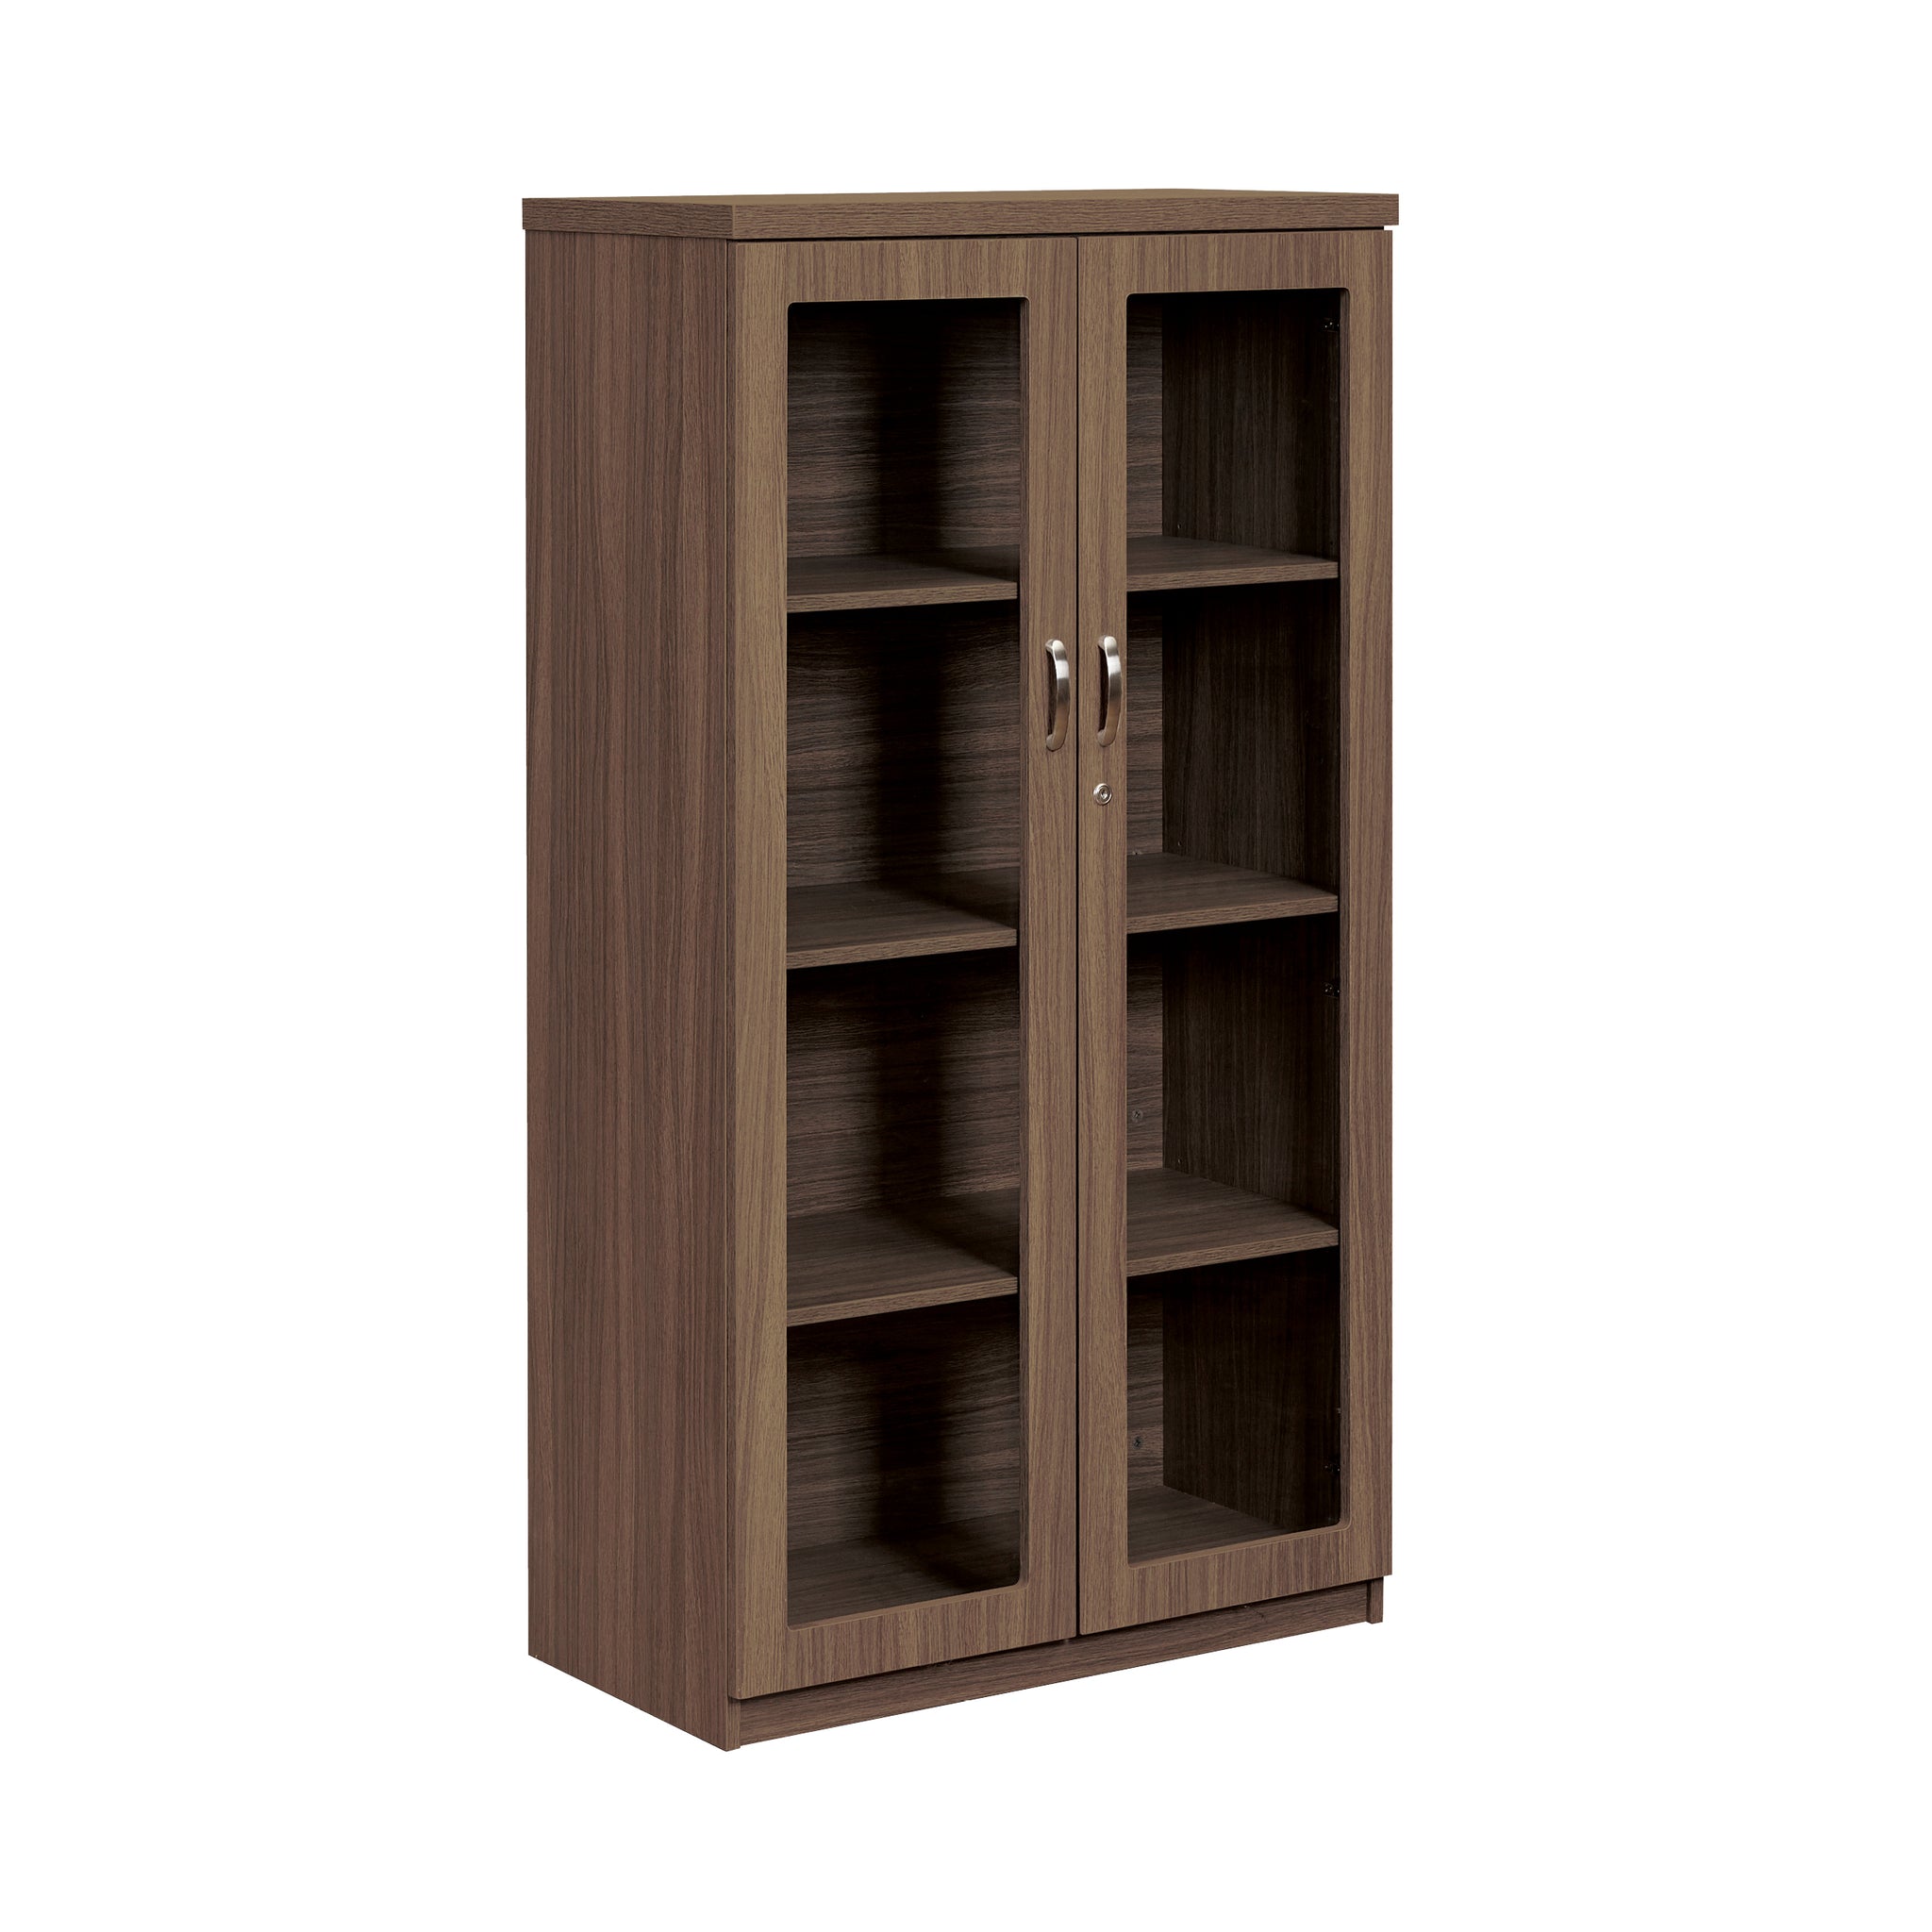 Hedcor Cobalt 32 Bookcase glass inlay